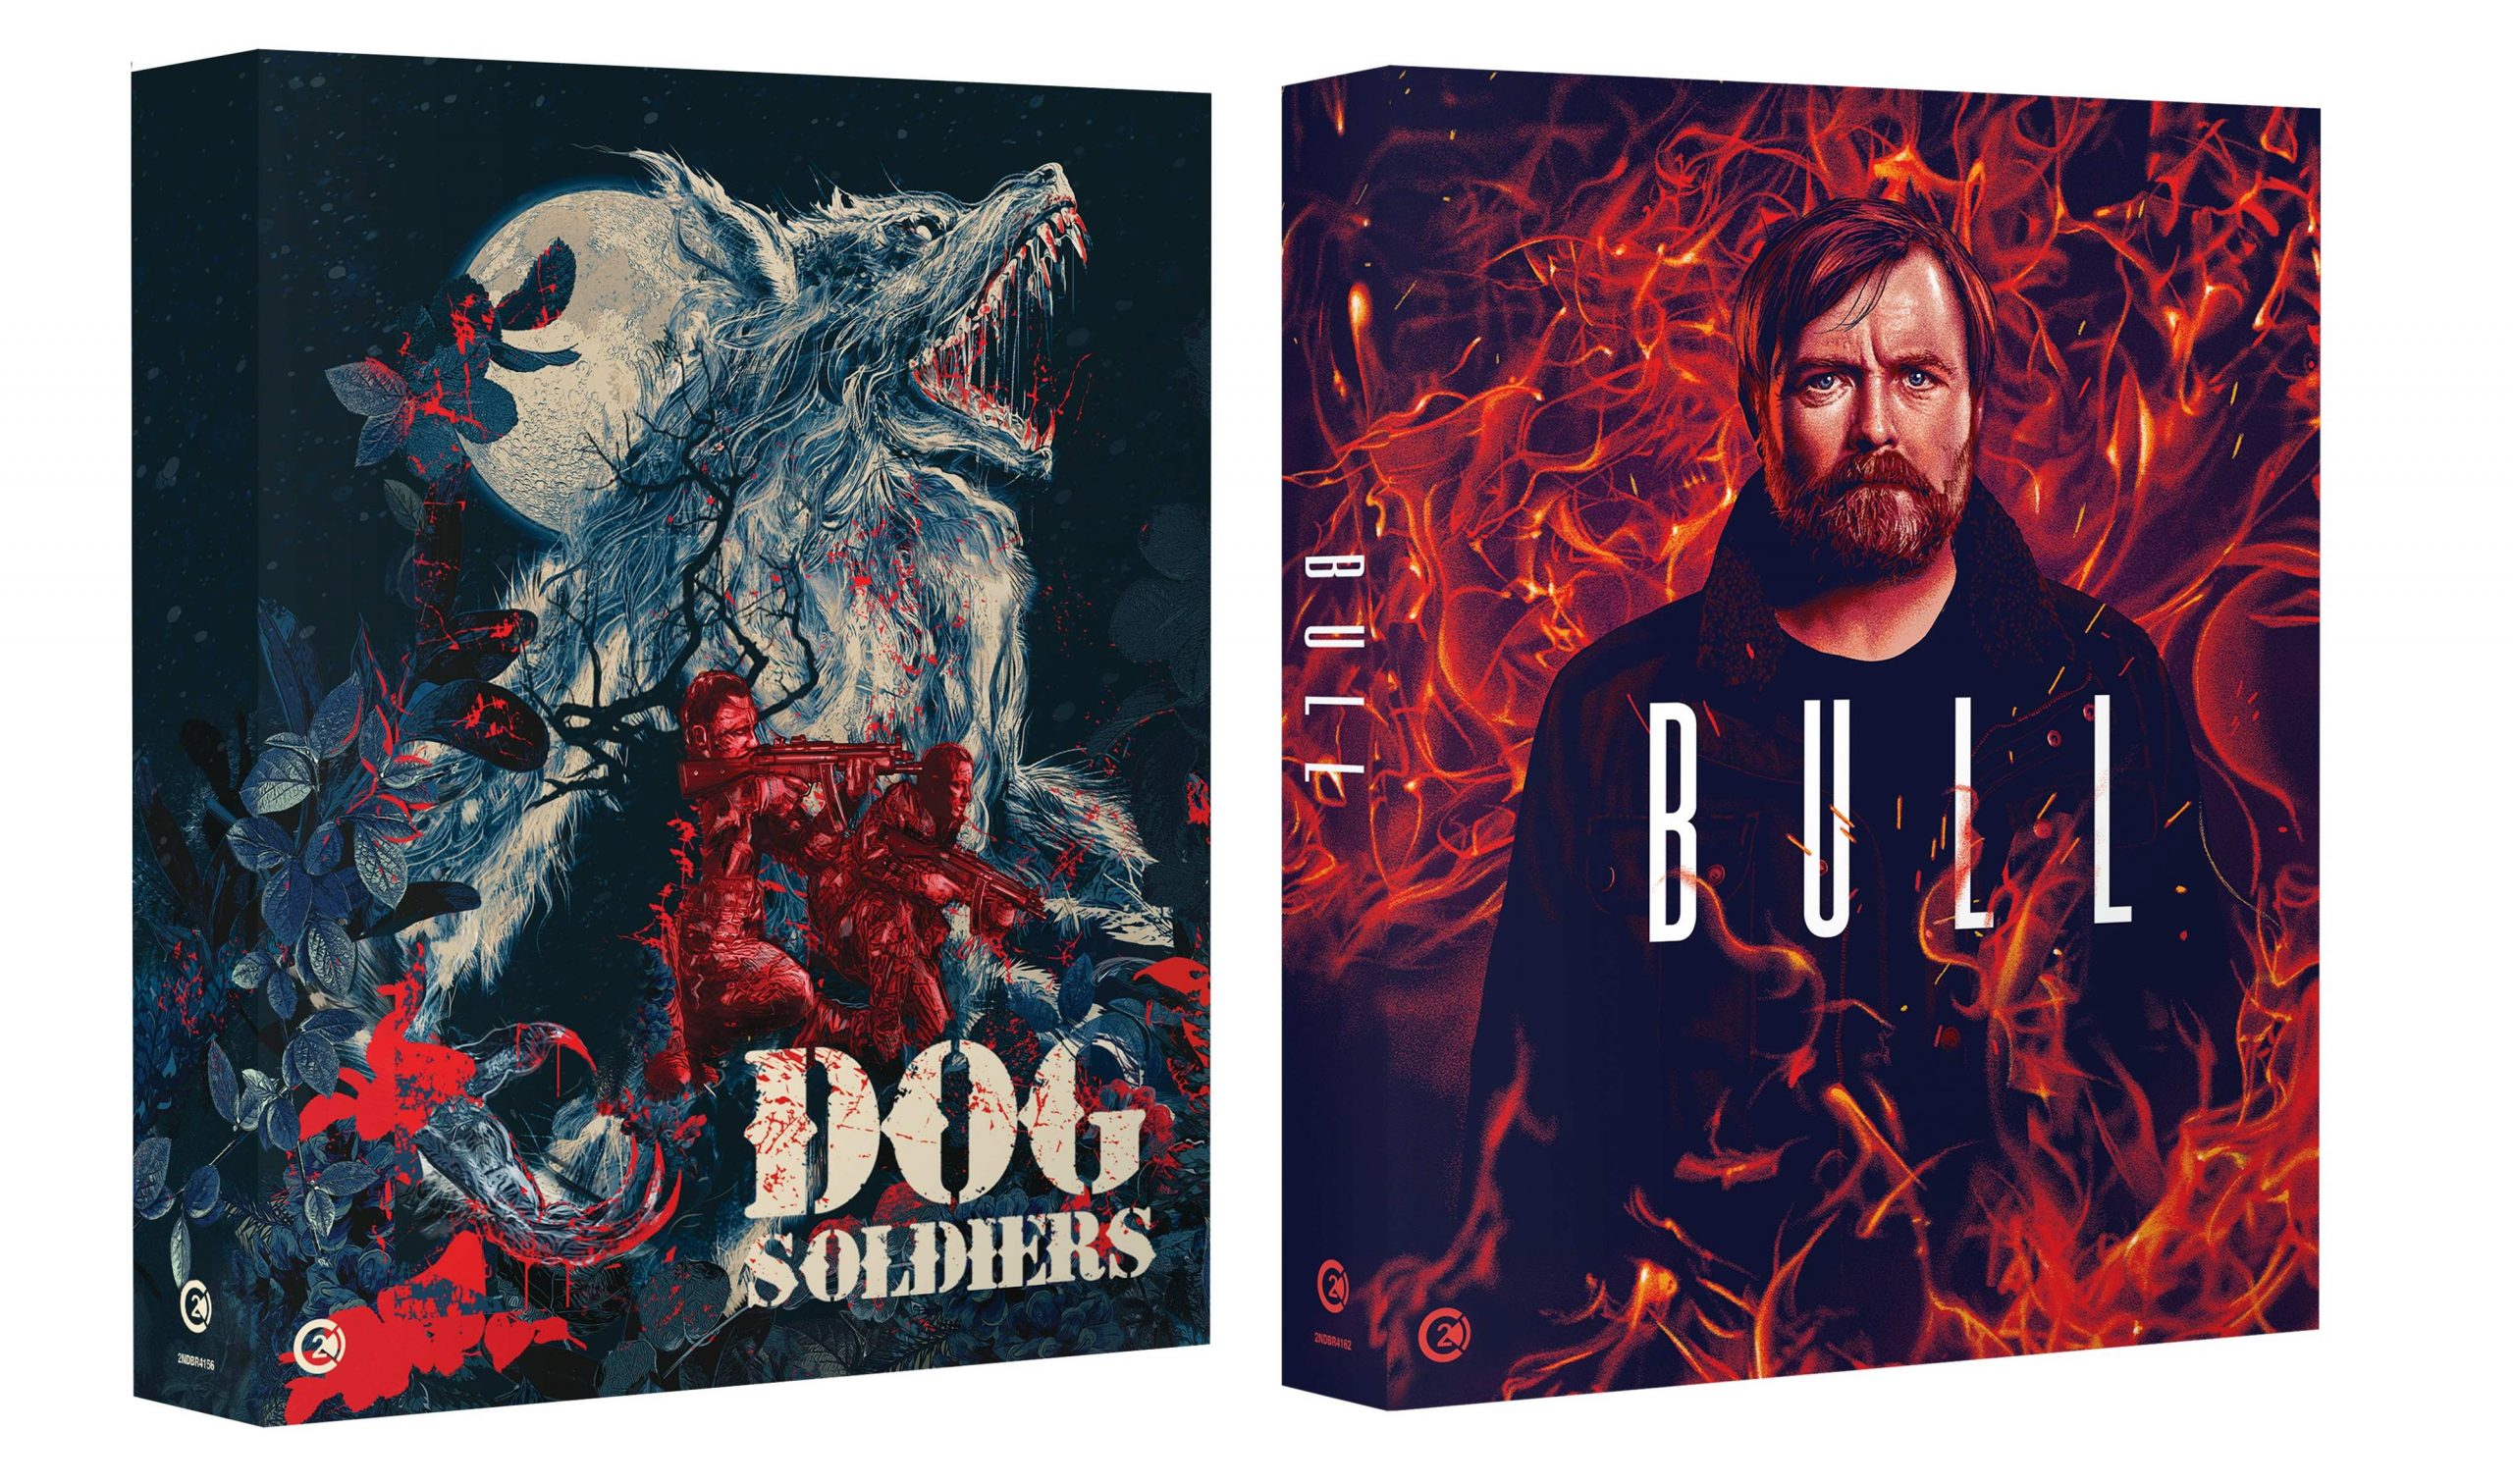 Dog Soldiers & Bull